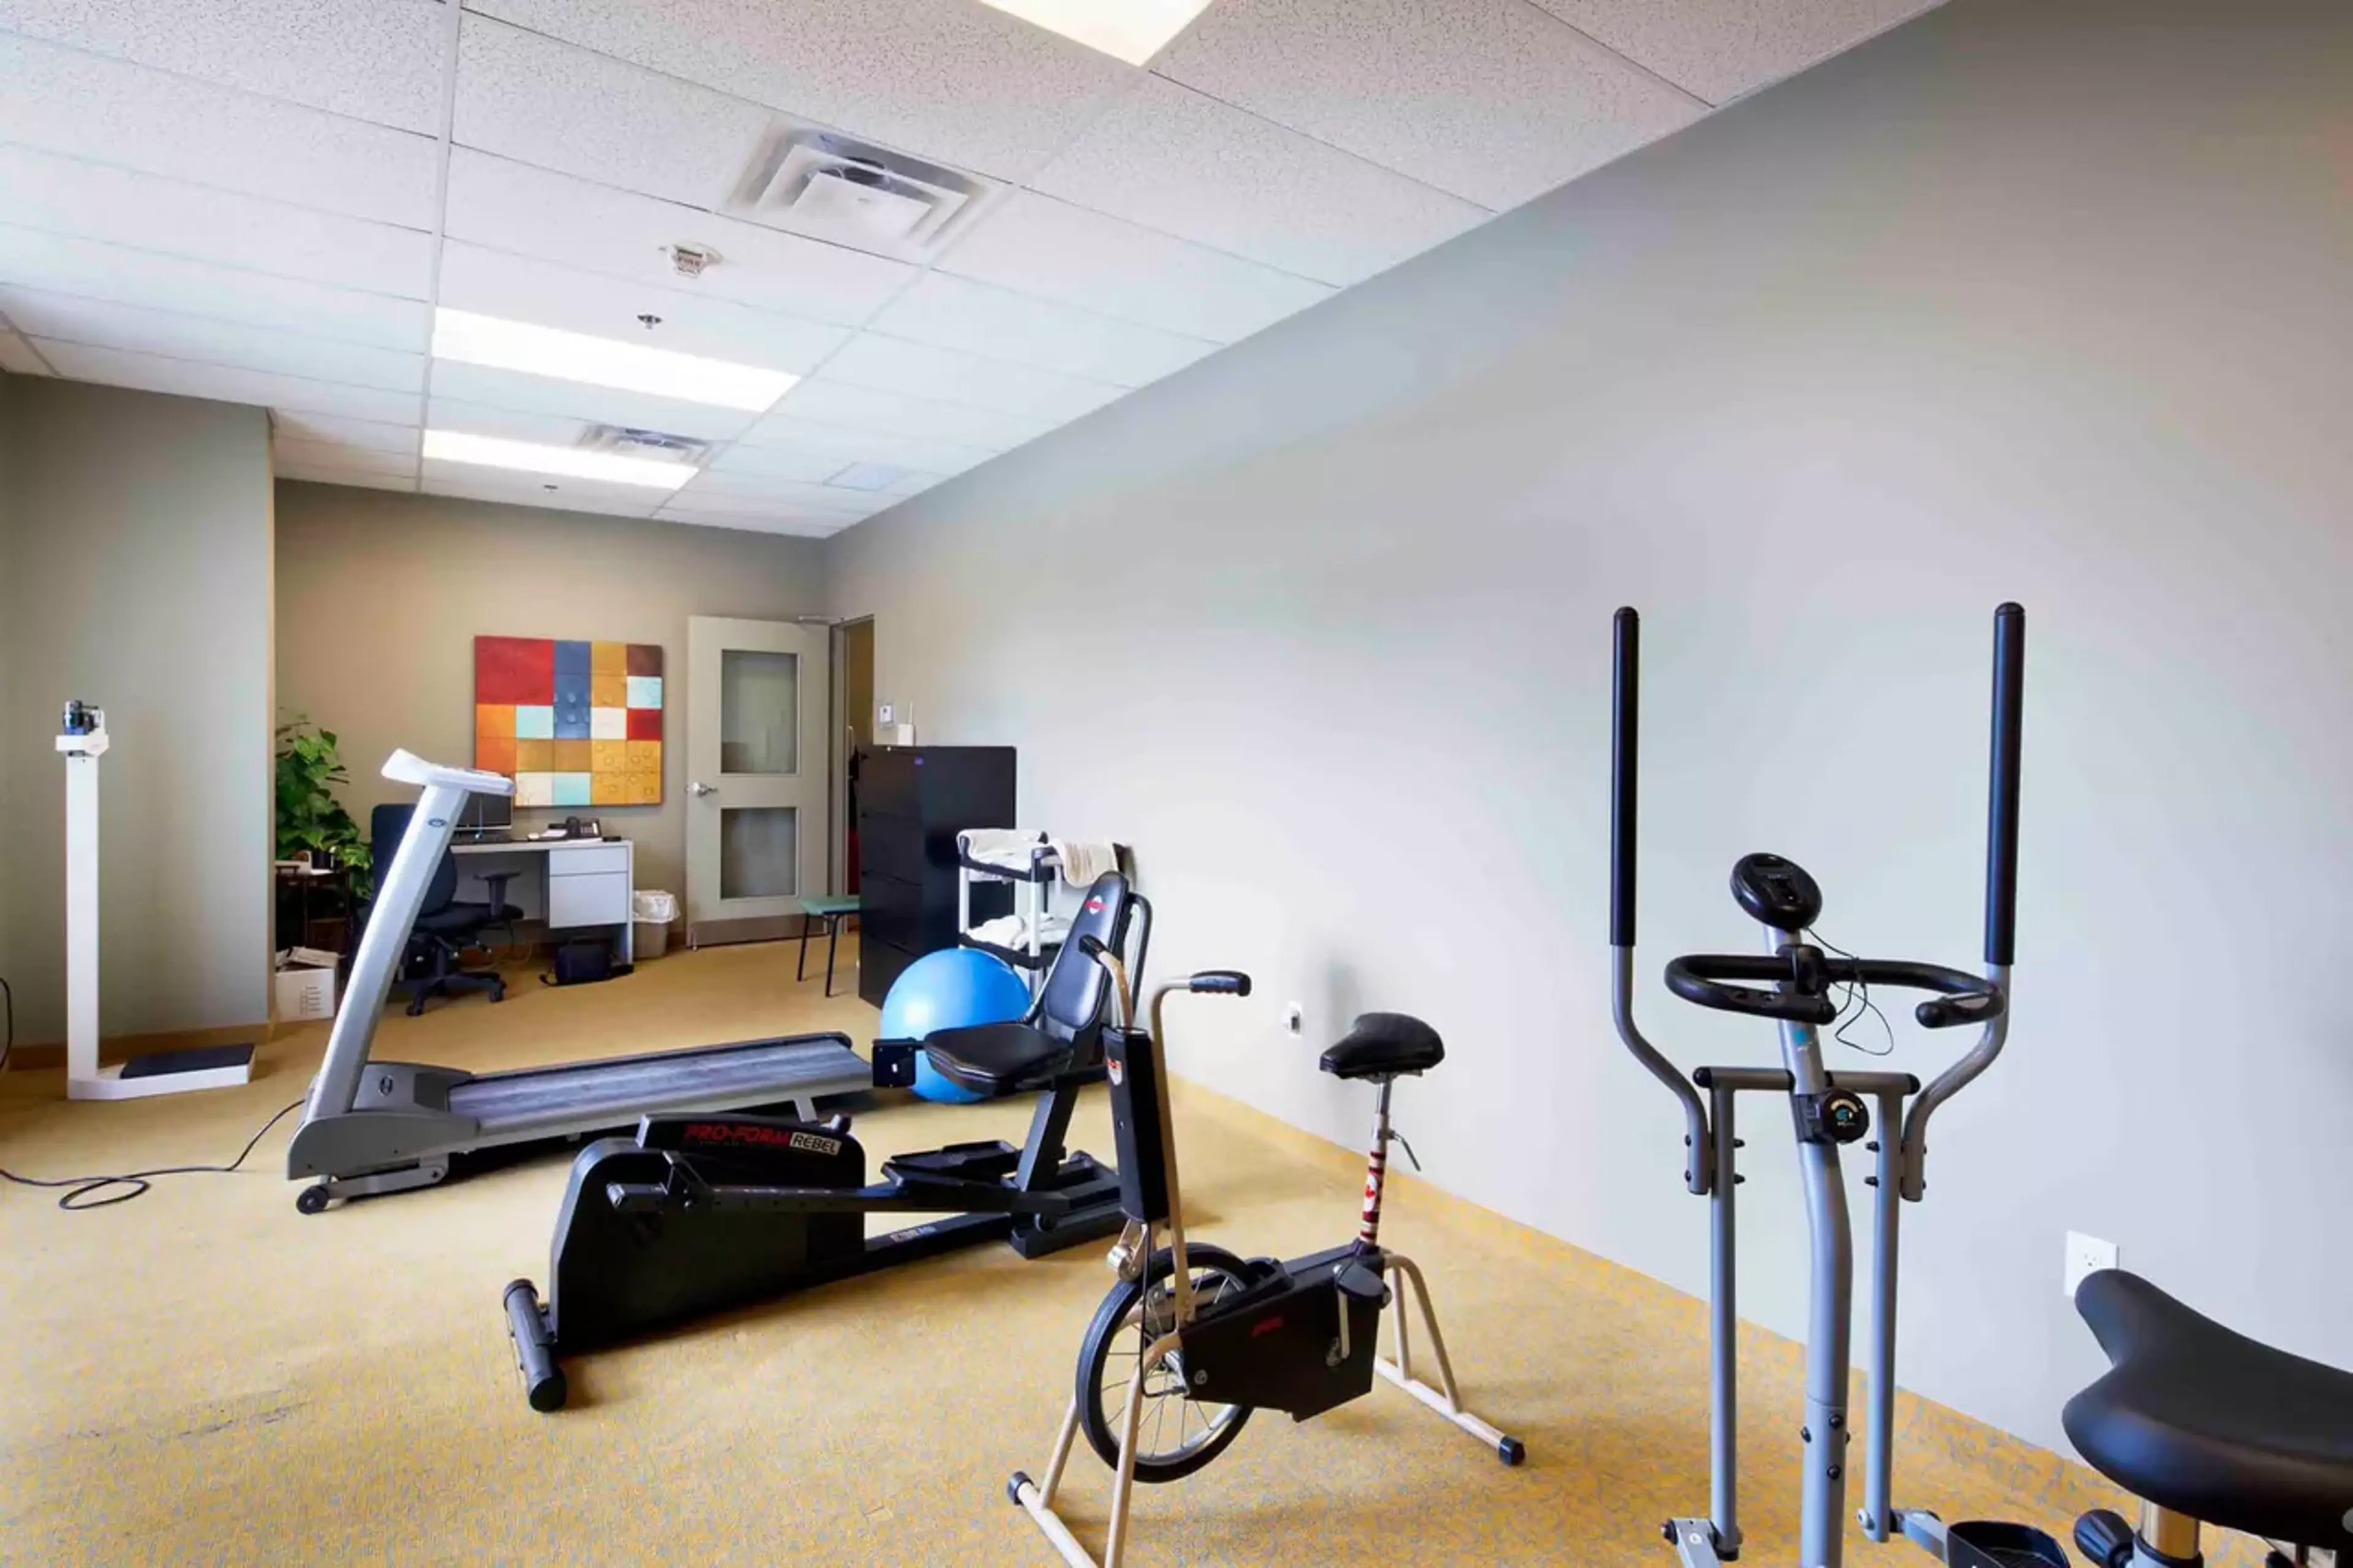 Port Perry Villa Exercise Room